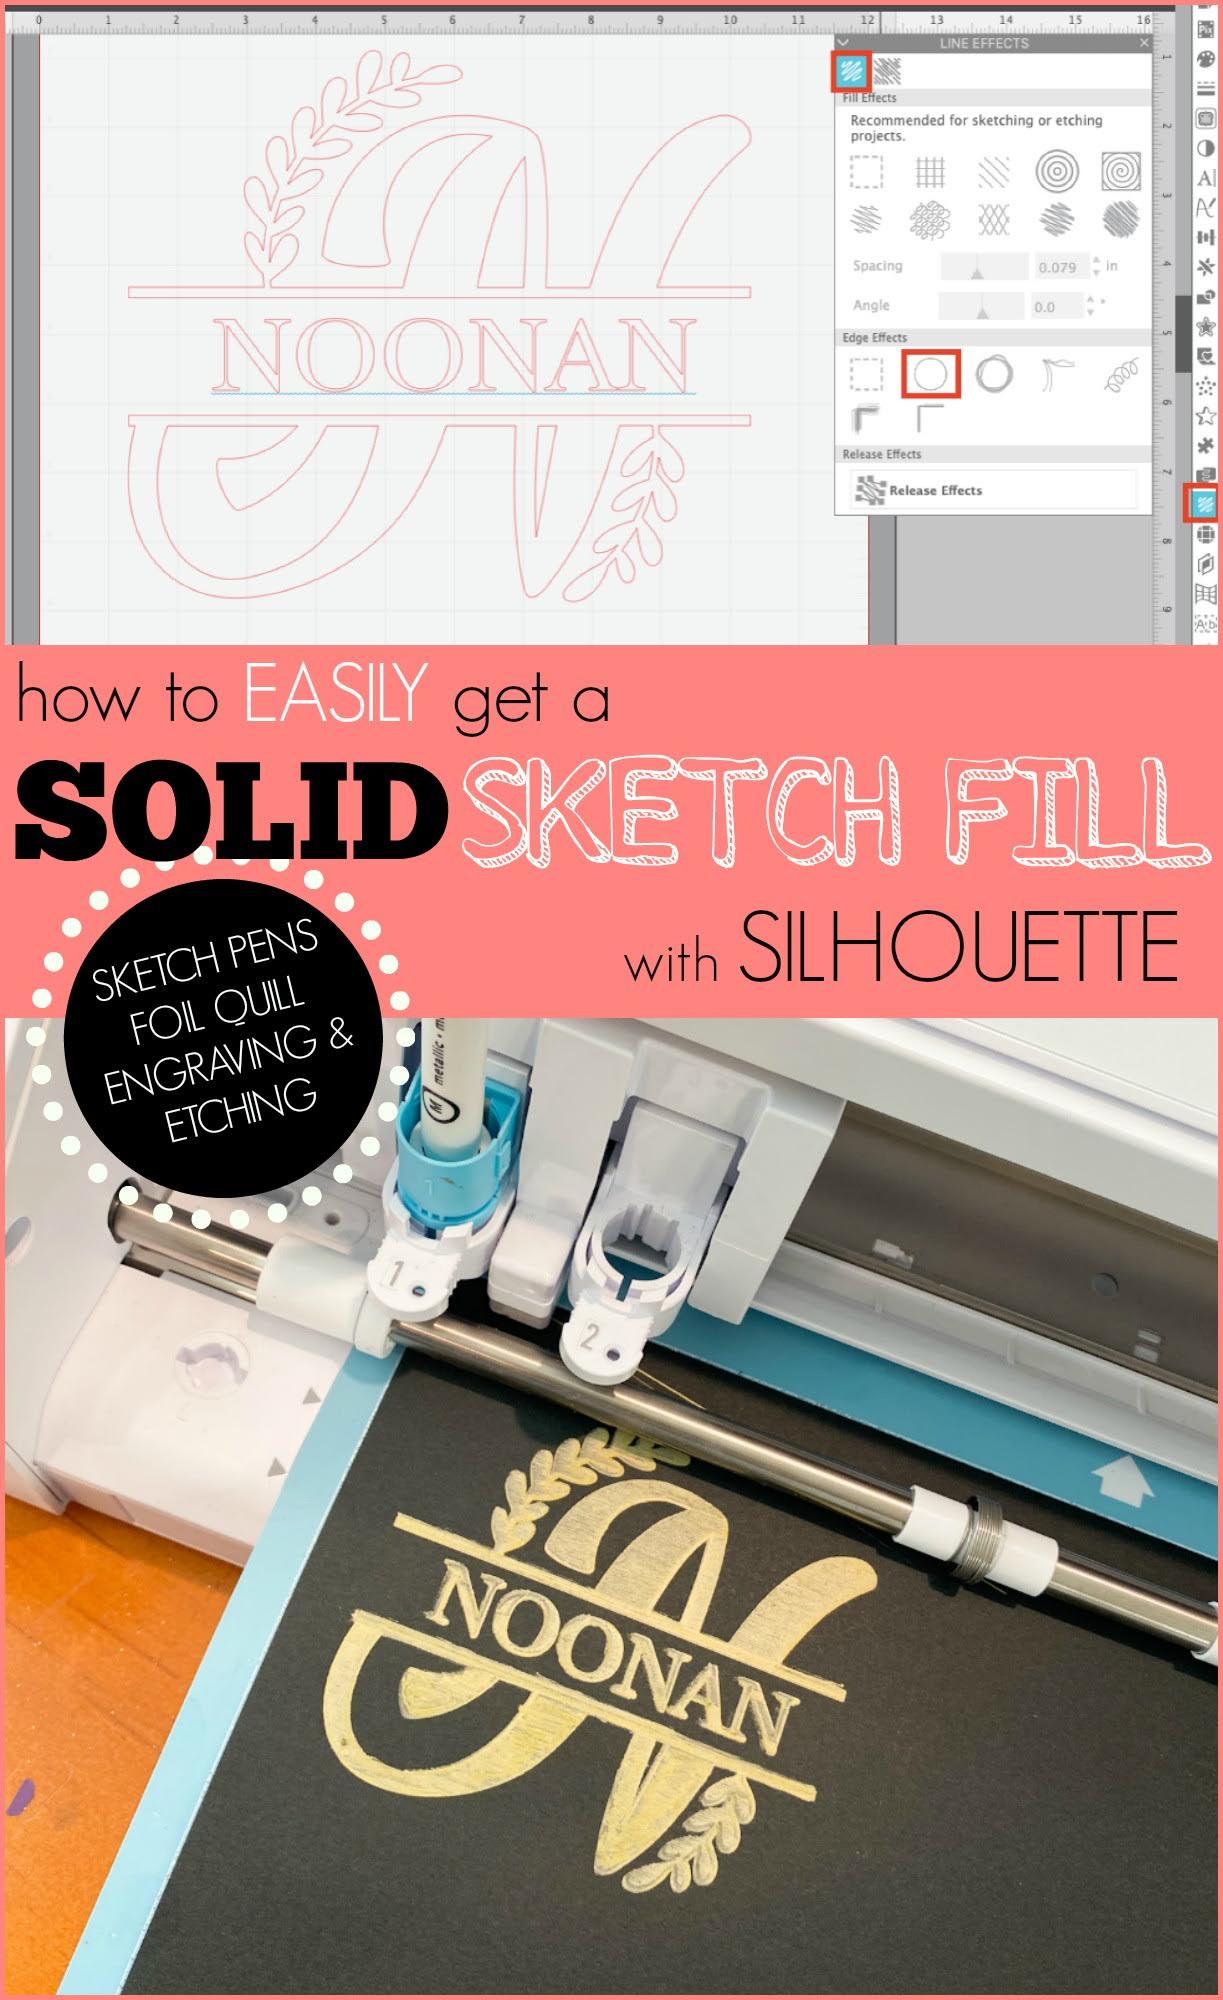 silhouette america blog, silhouette 101, foil quill, sketch pens, etching